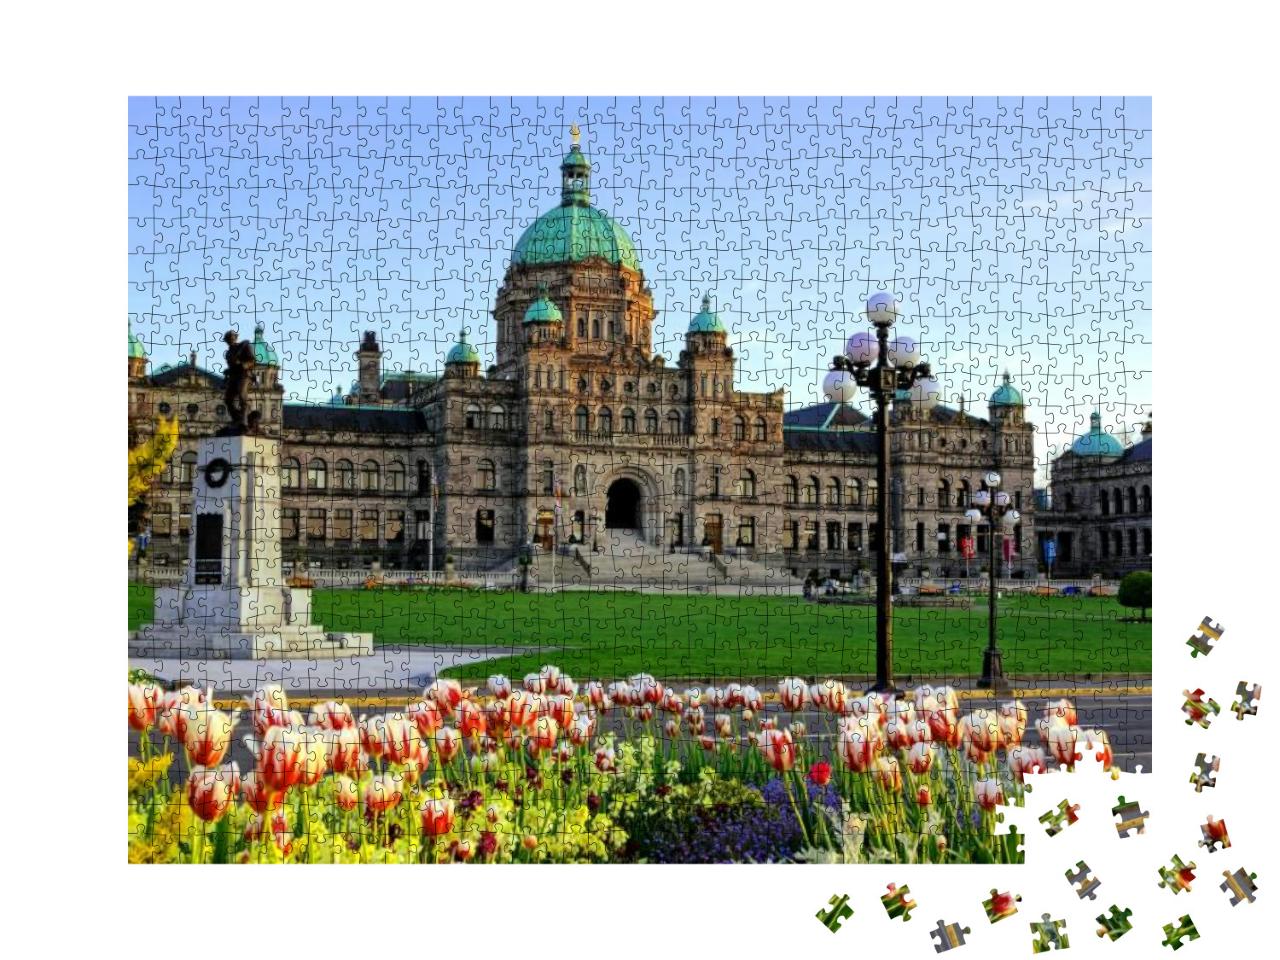 Historic British Columbia Provincial Parliament Building... Jigsaw Puzzle with 1000 pieces